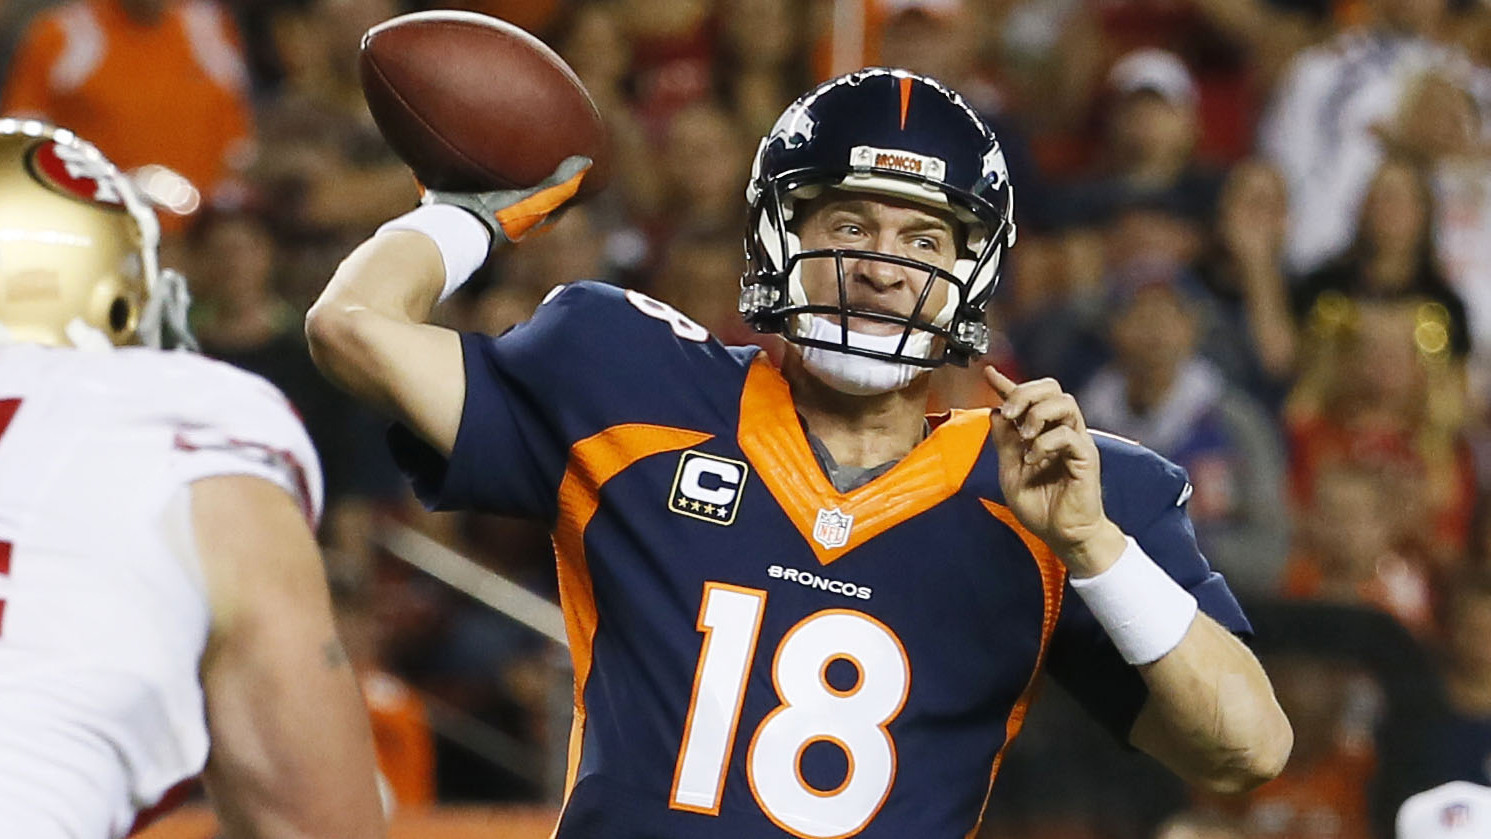 Peyton Manning breaks NFL record with 509th touchdown pass - LA Times